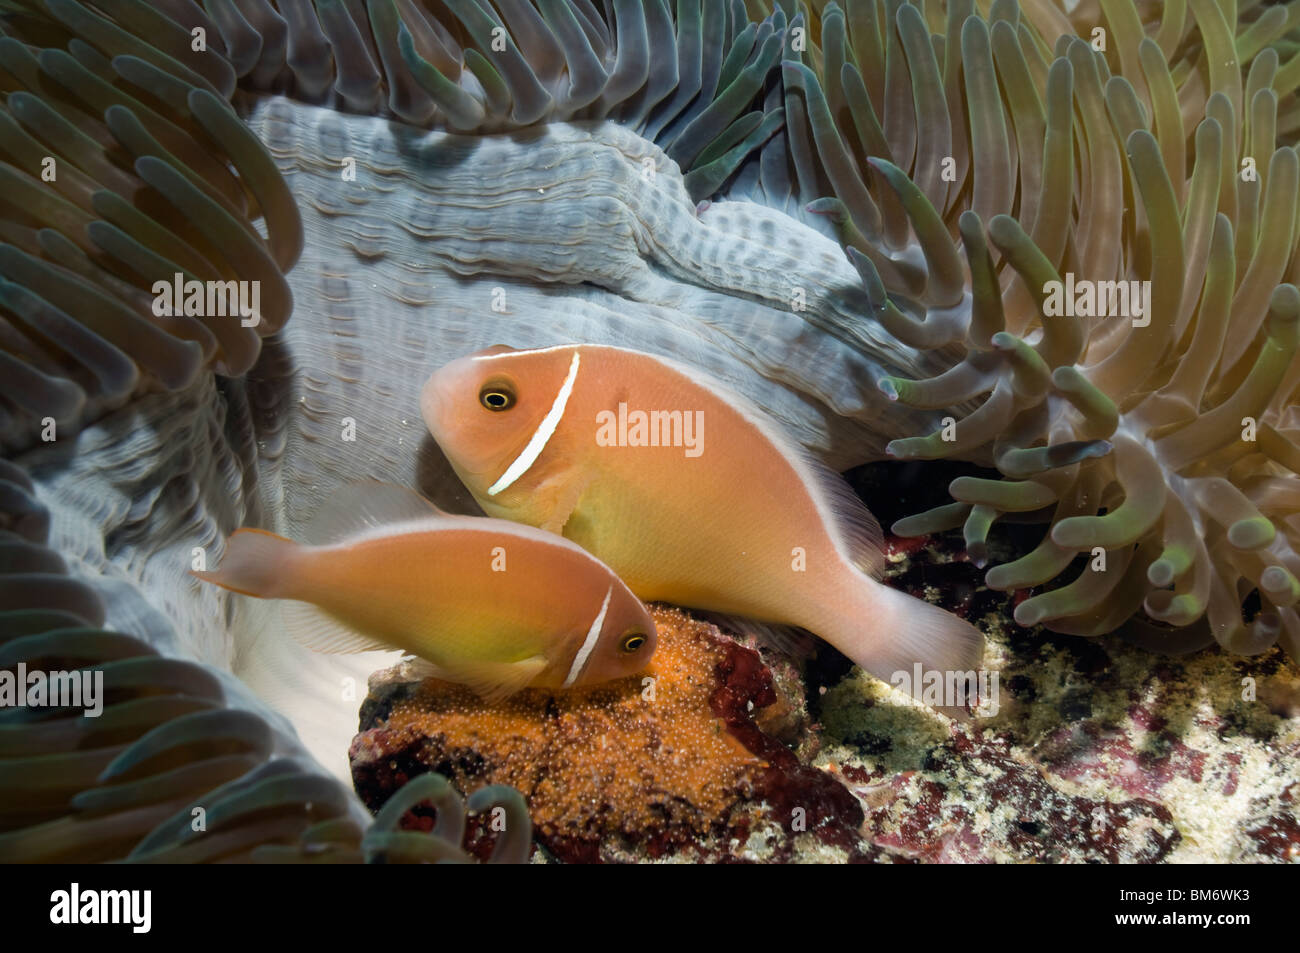 Pink anemonefish (Amphiprion perideraion), spawning pair with freshly laid eggs. Misool, Raja Ampat, West Papua, Indonesia. Stock Photo